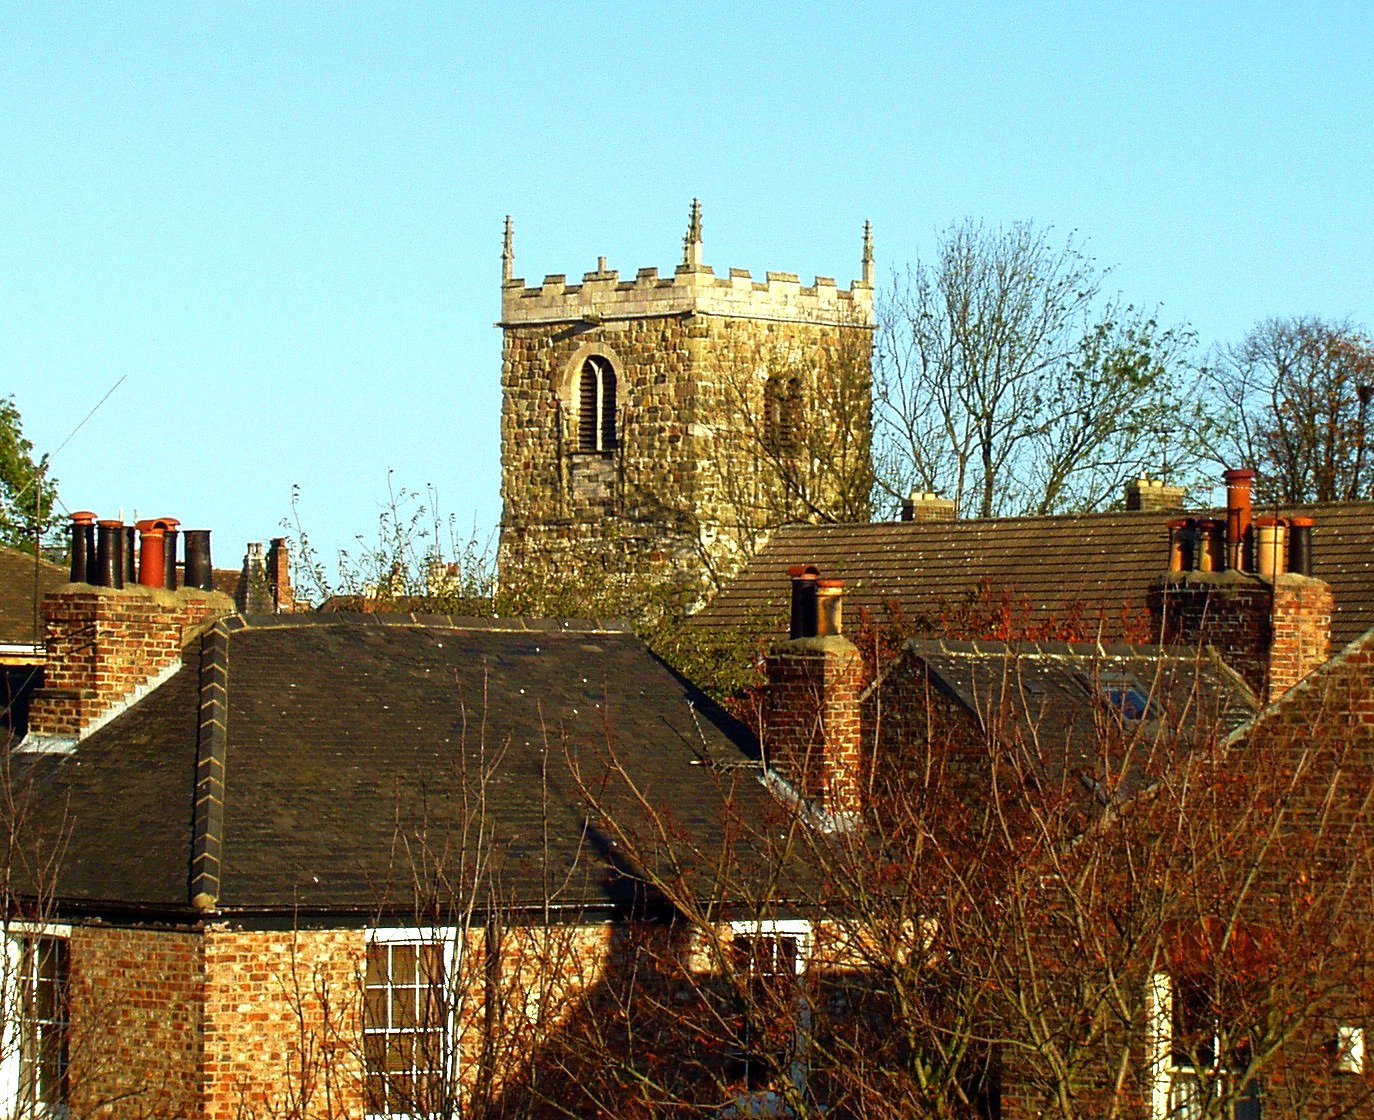 old brick buildings with brick spires sit against a clear blue sky